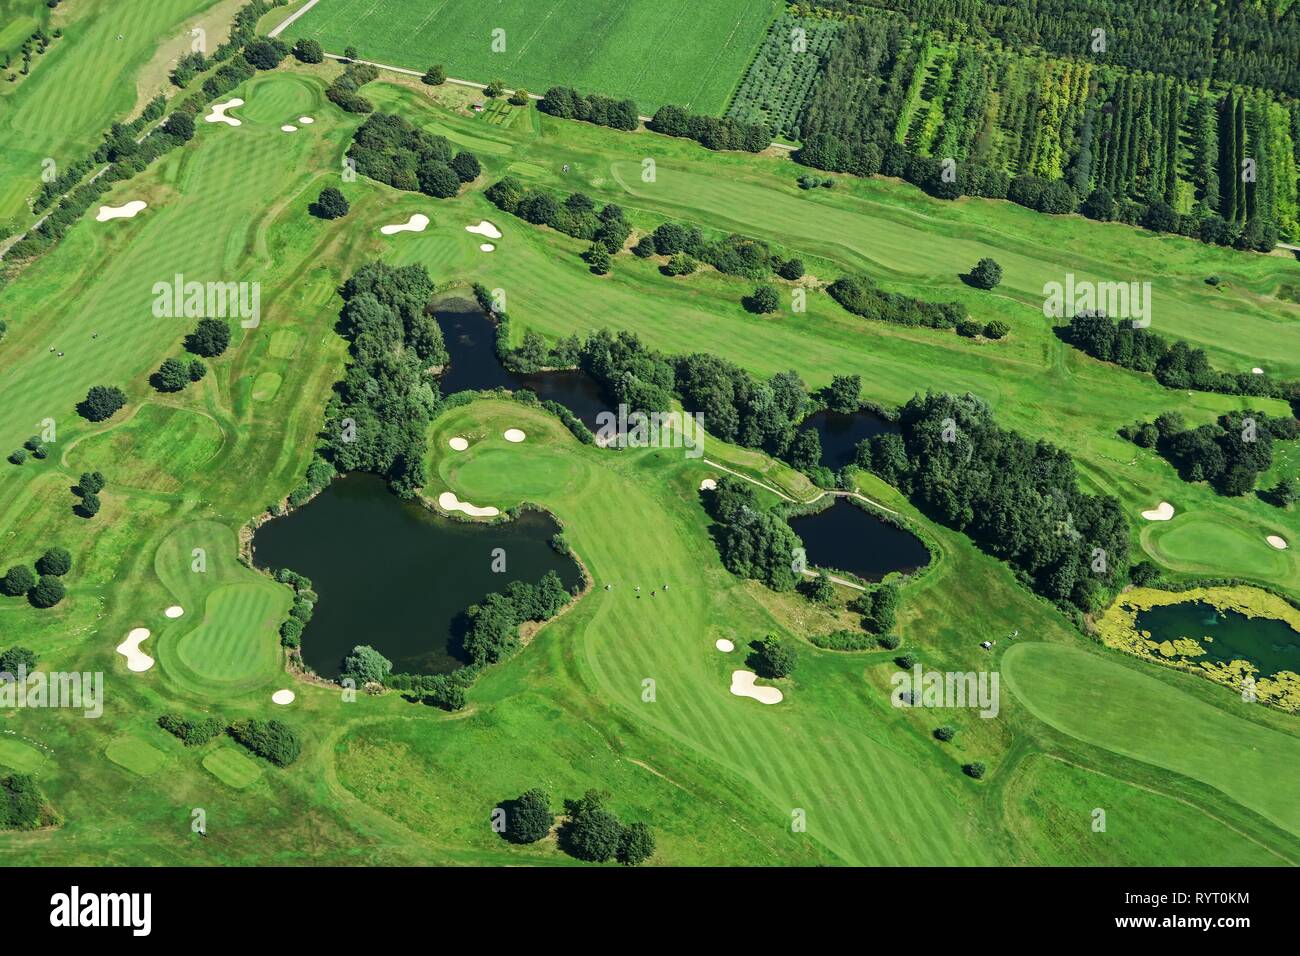 Green area with ponds on golf course, Krefeld, Germany Stock Photo